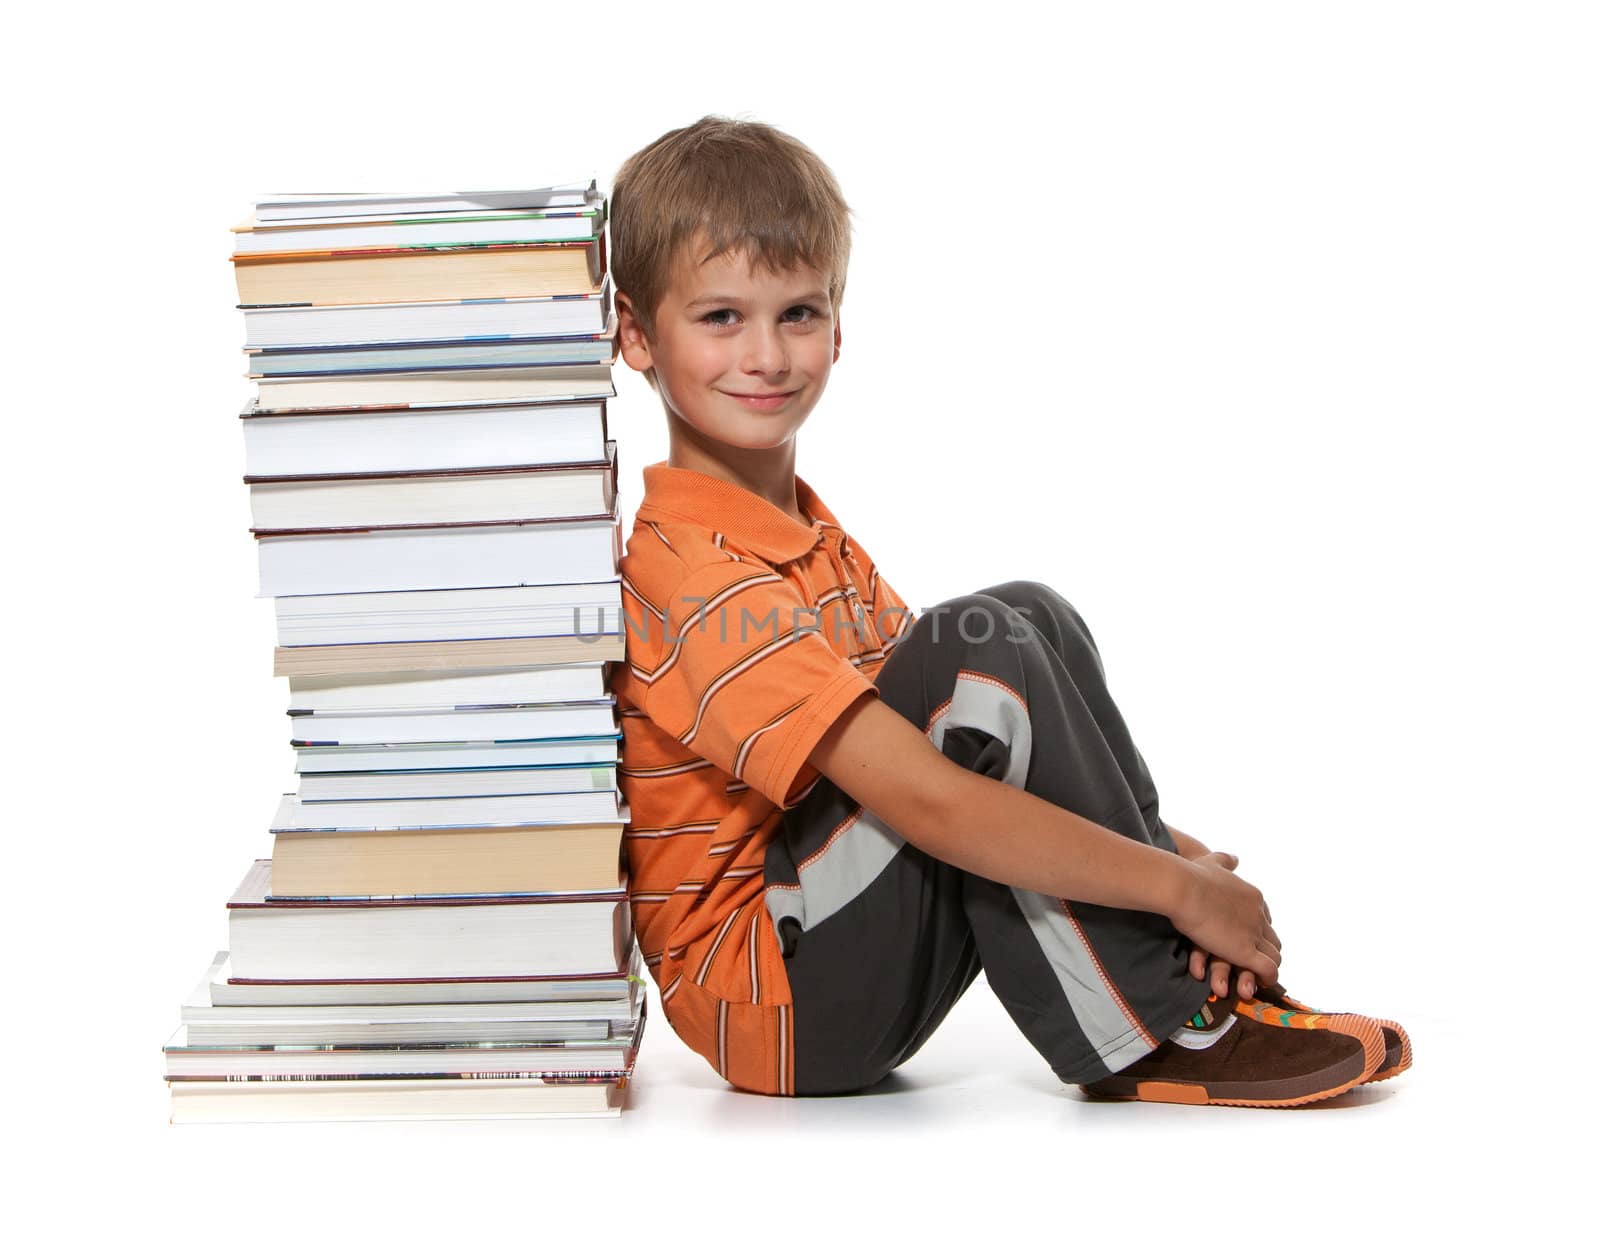 Boy and books isolated on a white background